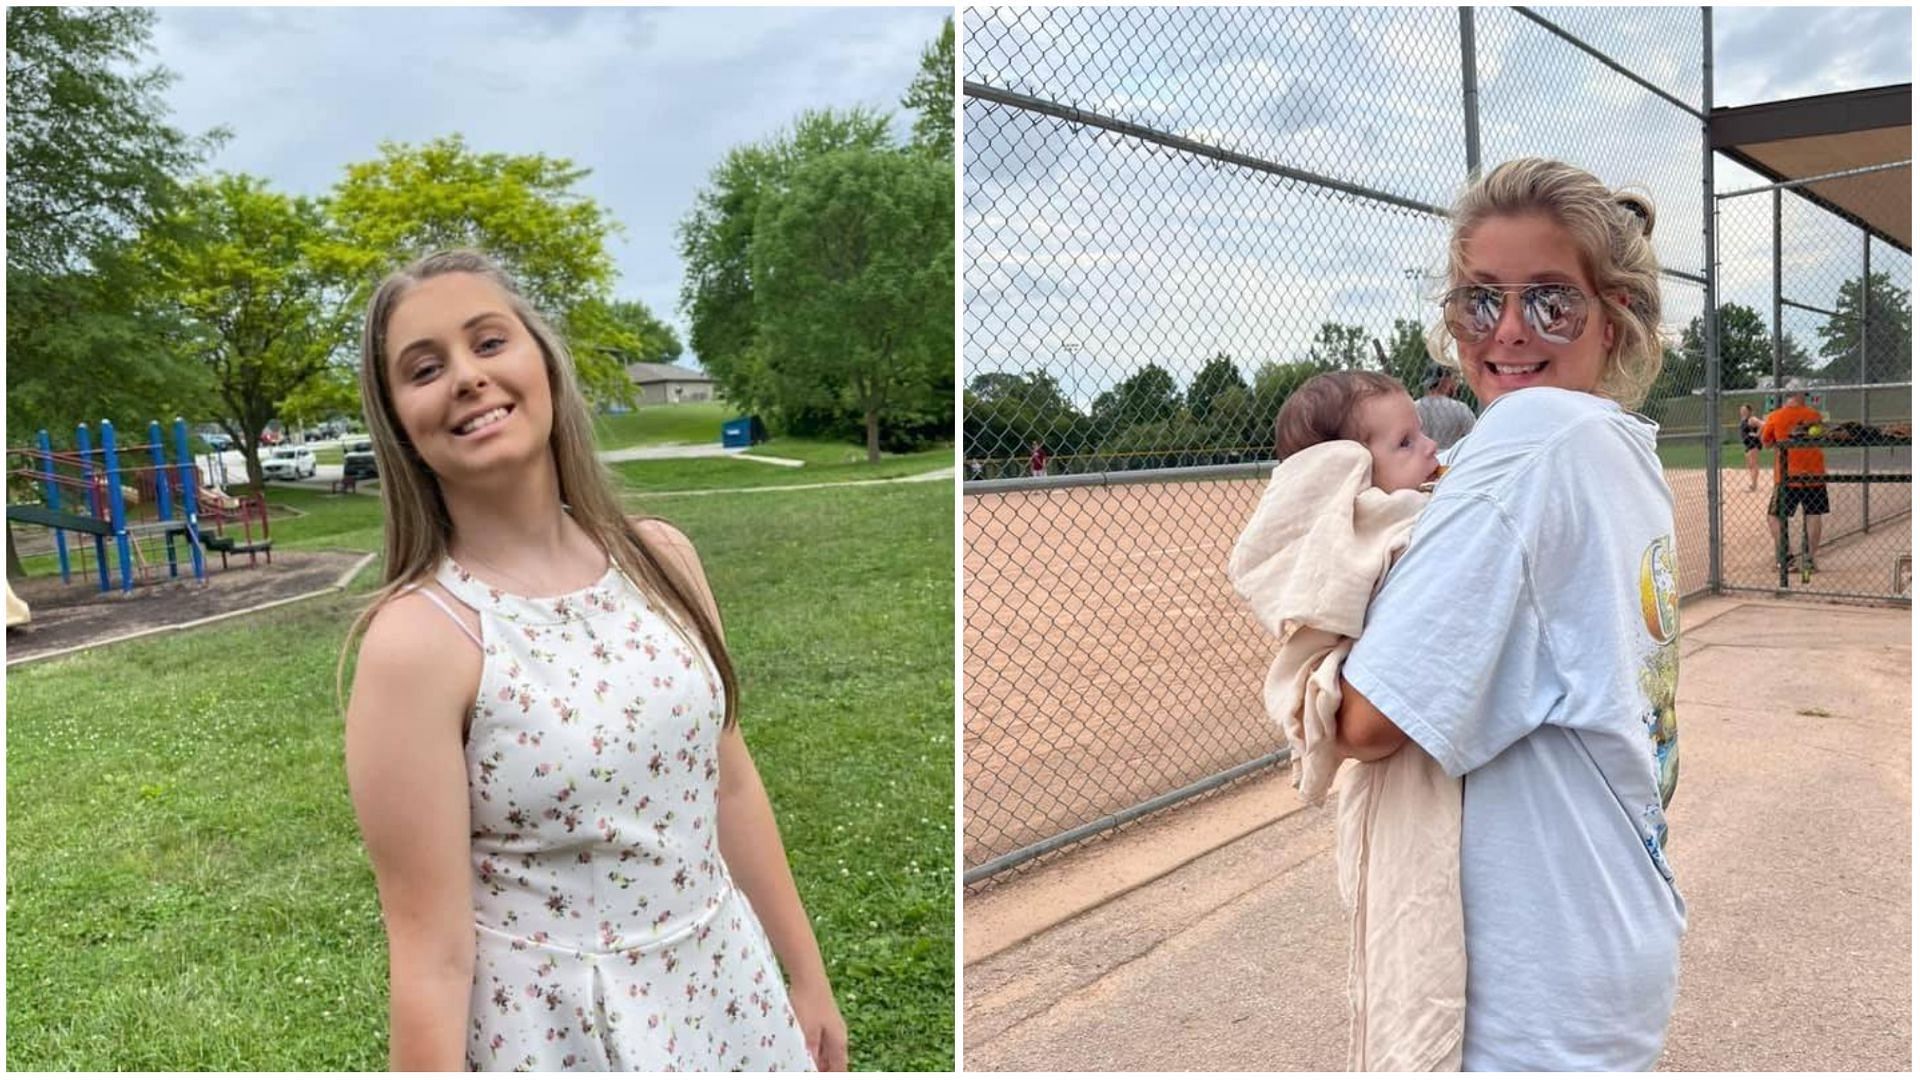 Police ask for public help as Missouri teenager remains missing more than a week after she was reported missing by her family (Images via Missing Person Awareness Network and Kathy Dubes)